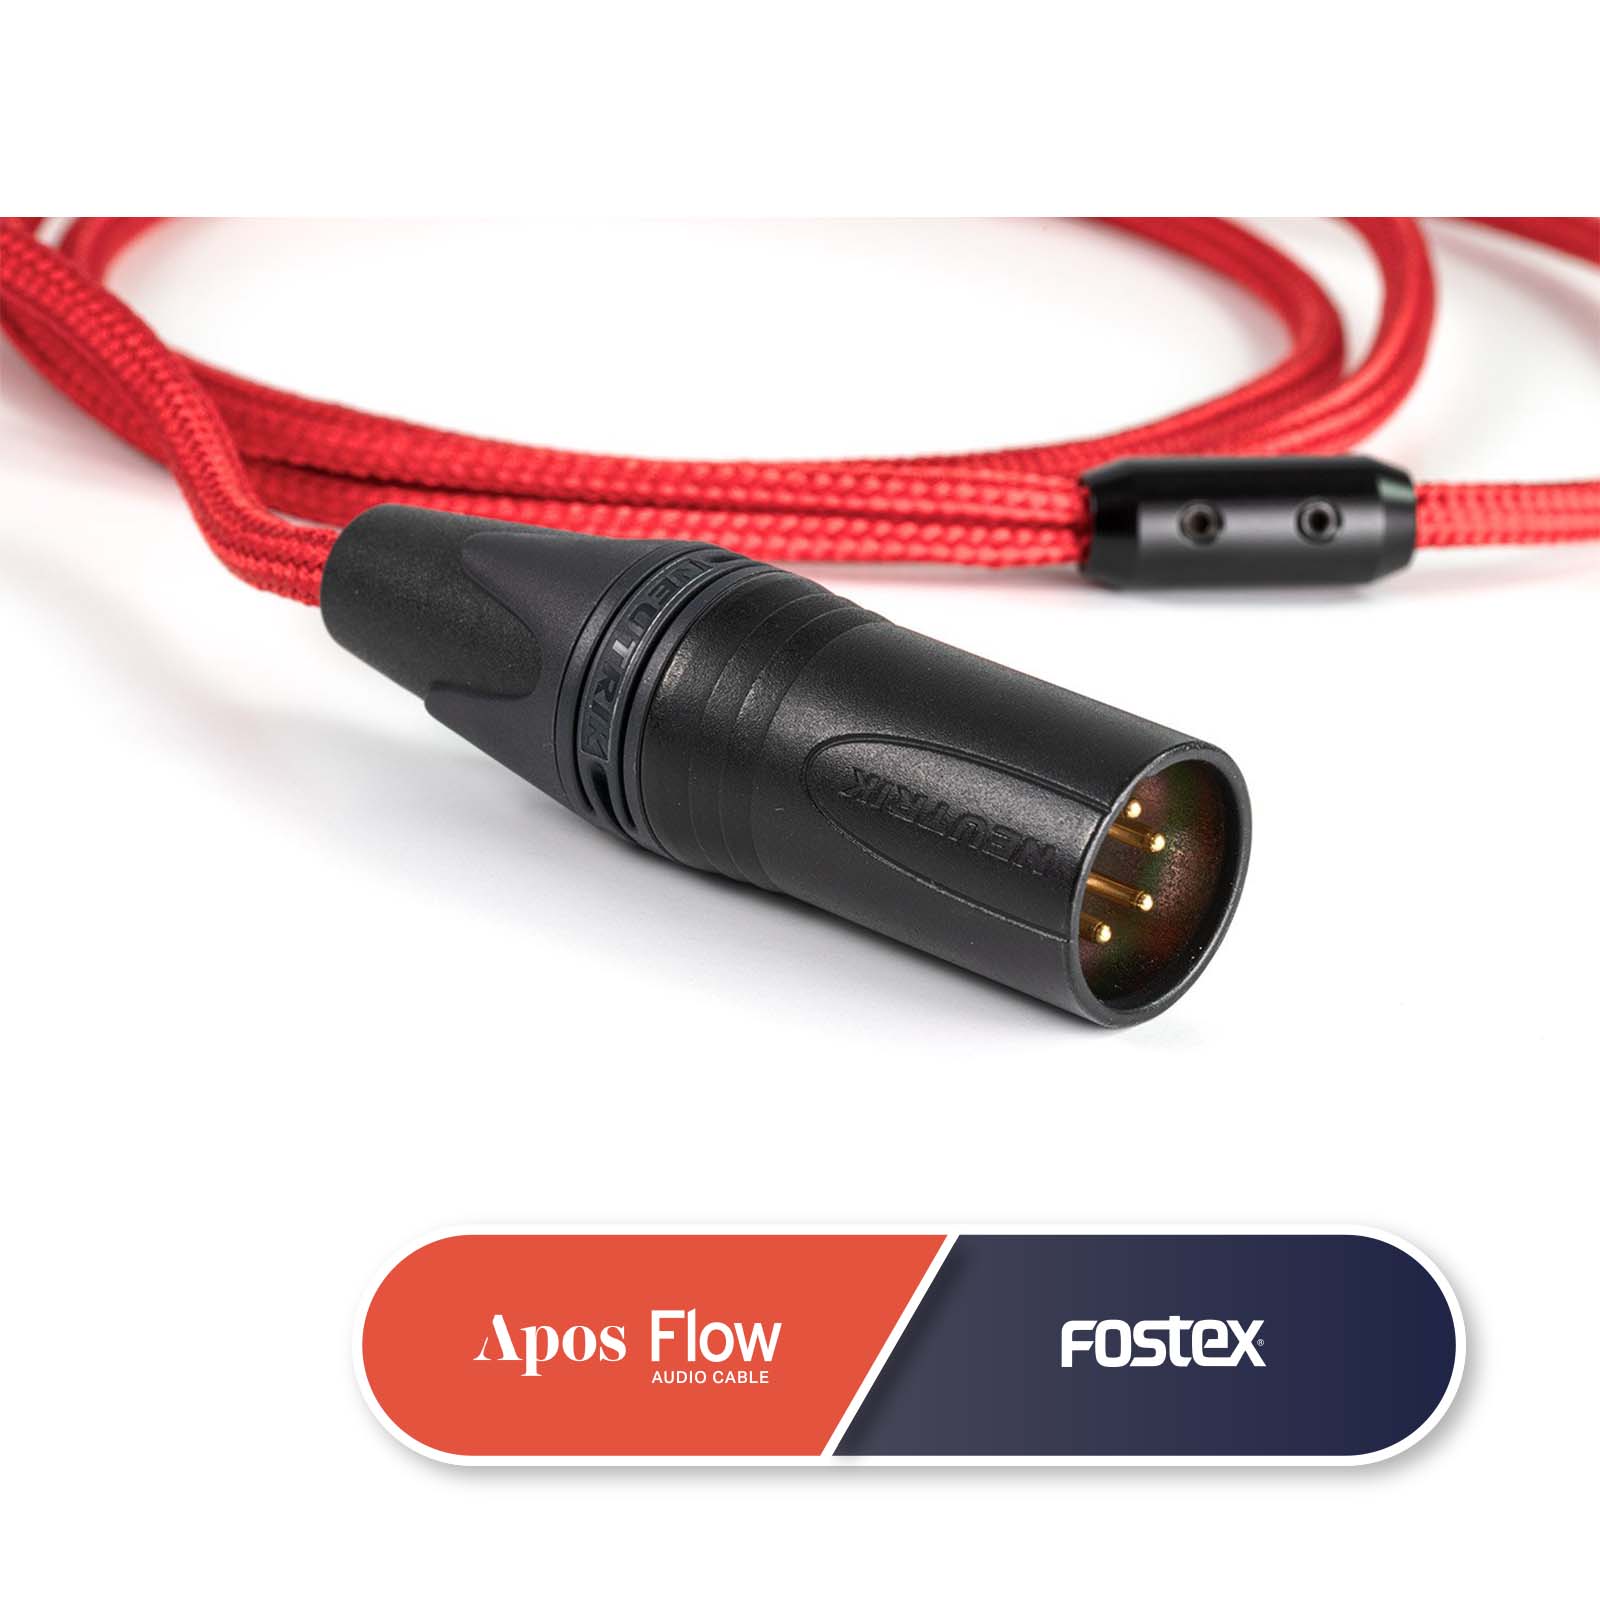 Apos Flow Headphone Cable for [Fostex] TH610 / TH900mk2 / TH909